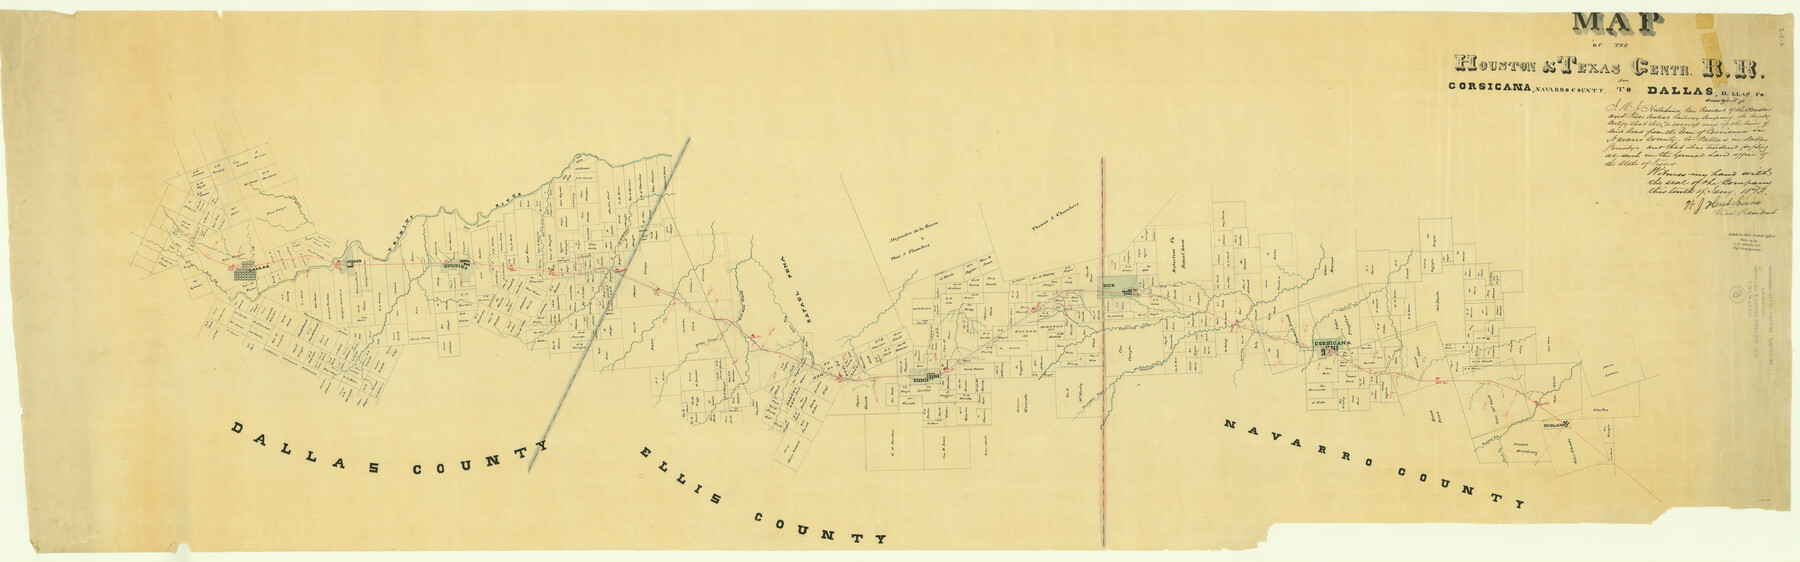 64041, Map of the Houston & Texas Centr. R.R. from Corsicana, Navarro County, to Dallas, Dallas County, General Map Collection